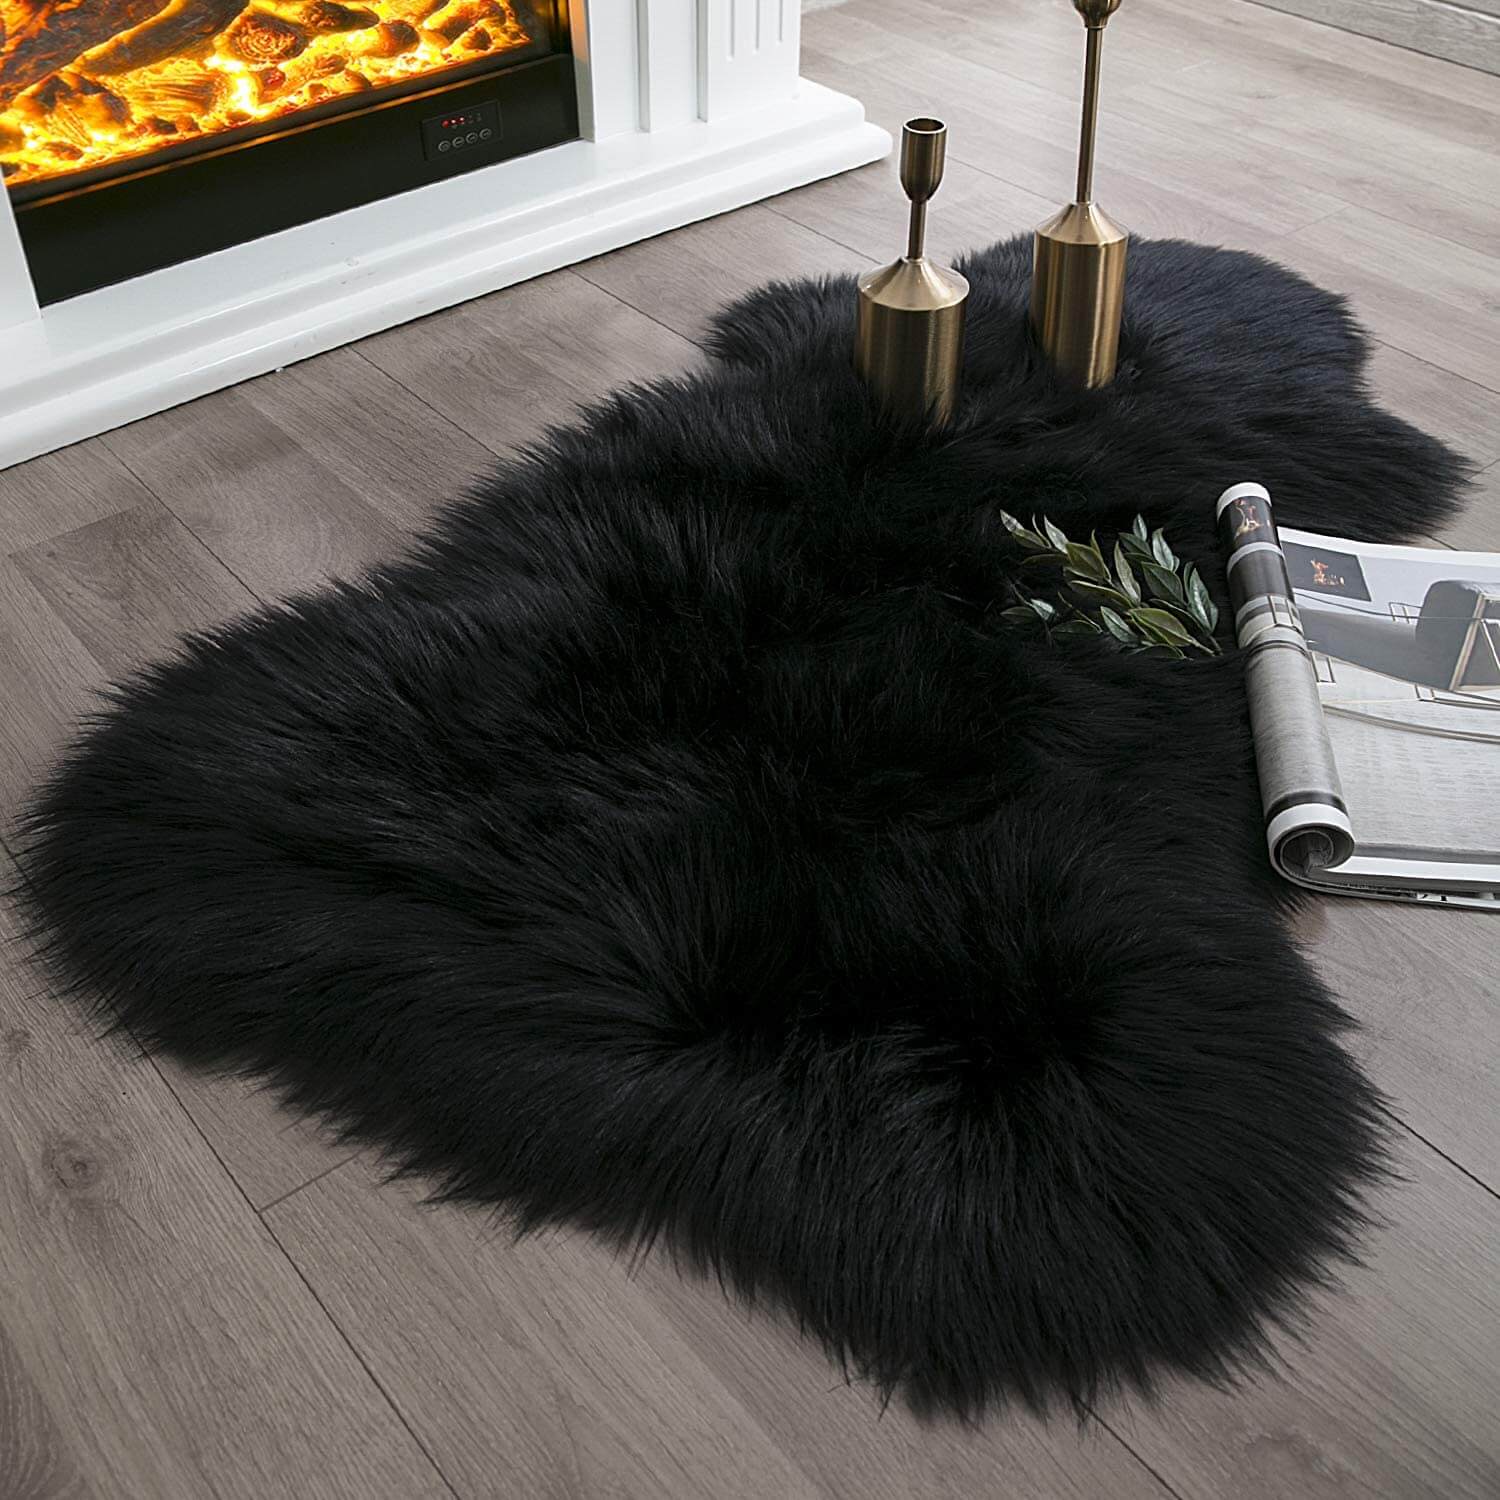 Soft Faux Fur Rug,Sheepskin Chair Cover Seat Pad Shaggy,Area Rugs